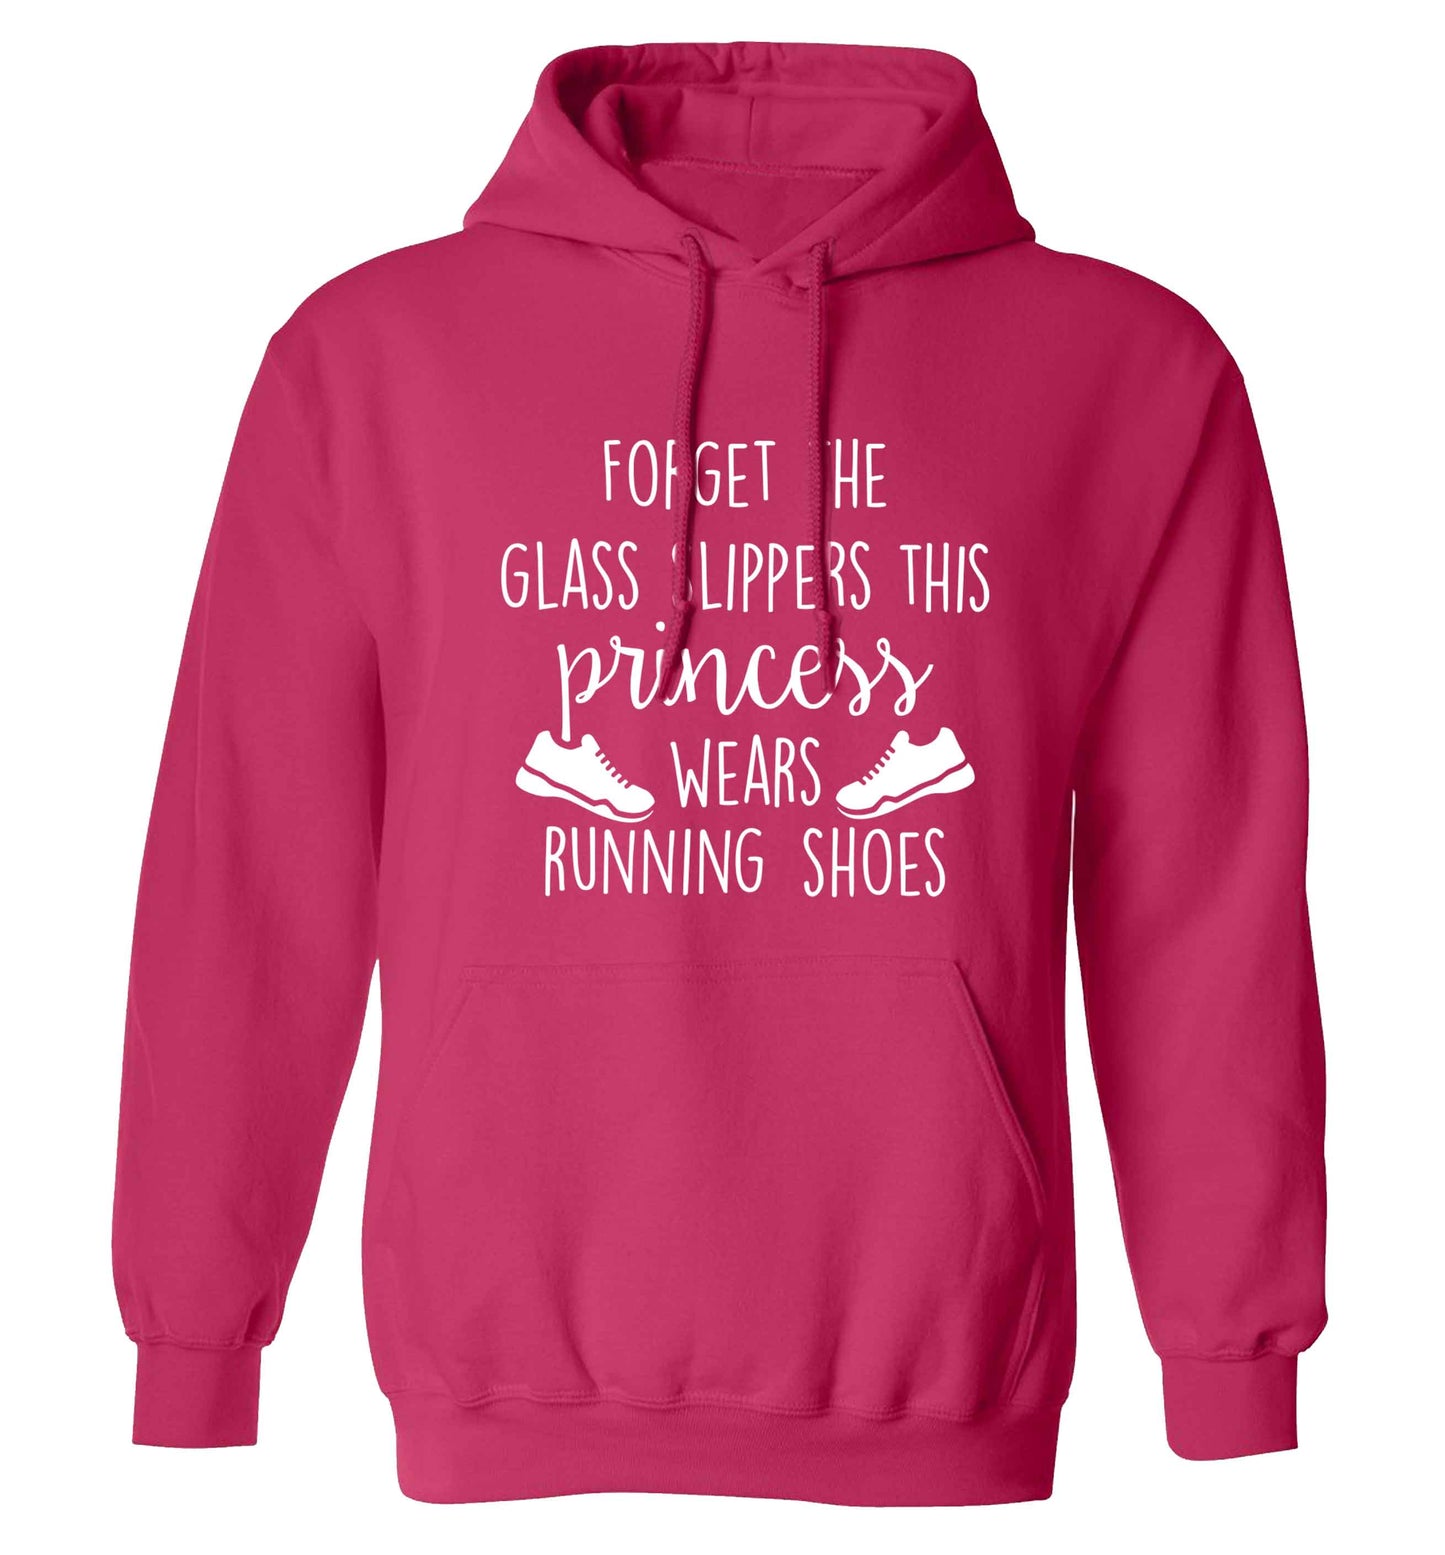 Forget the glass slippers this princess wears running shoes adults unisex pink hoodie 2XL